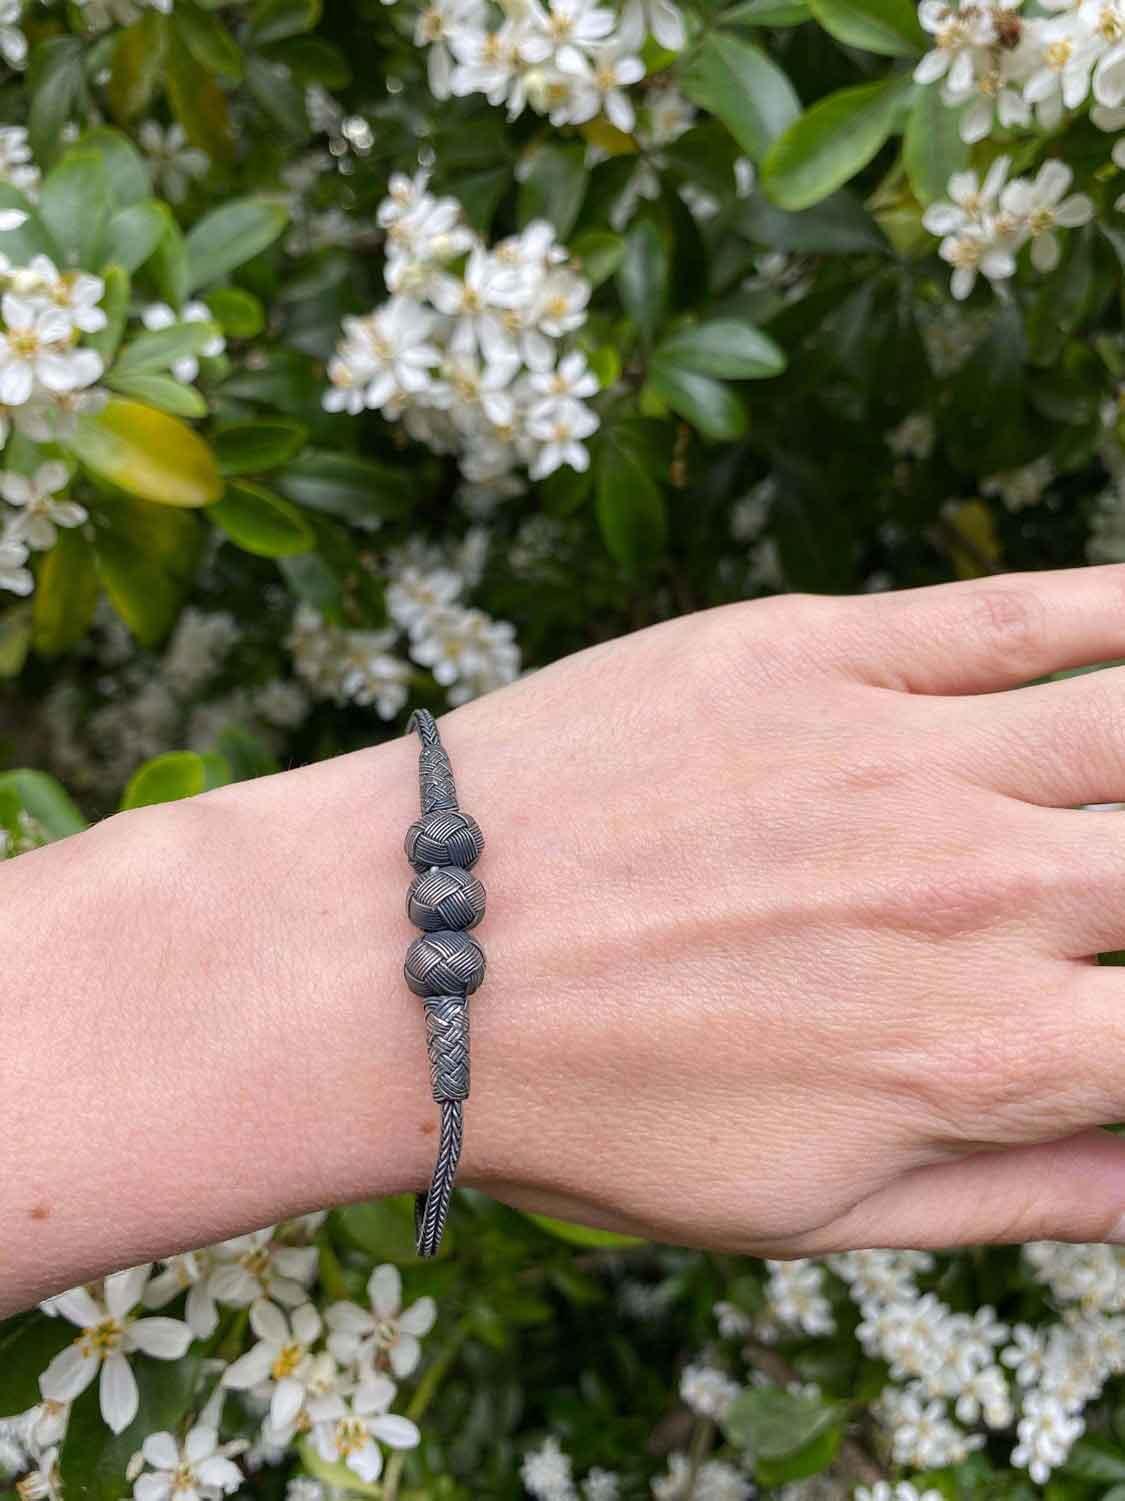 Handcrafted LOVE BRAIDED BRACELET, Silver Handmade Bracelet, Unique Design Bracelet, Silver Mens Bracelet, Dainty Charming Bracelet for him available at Moyoni Design